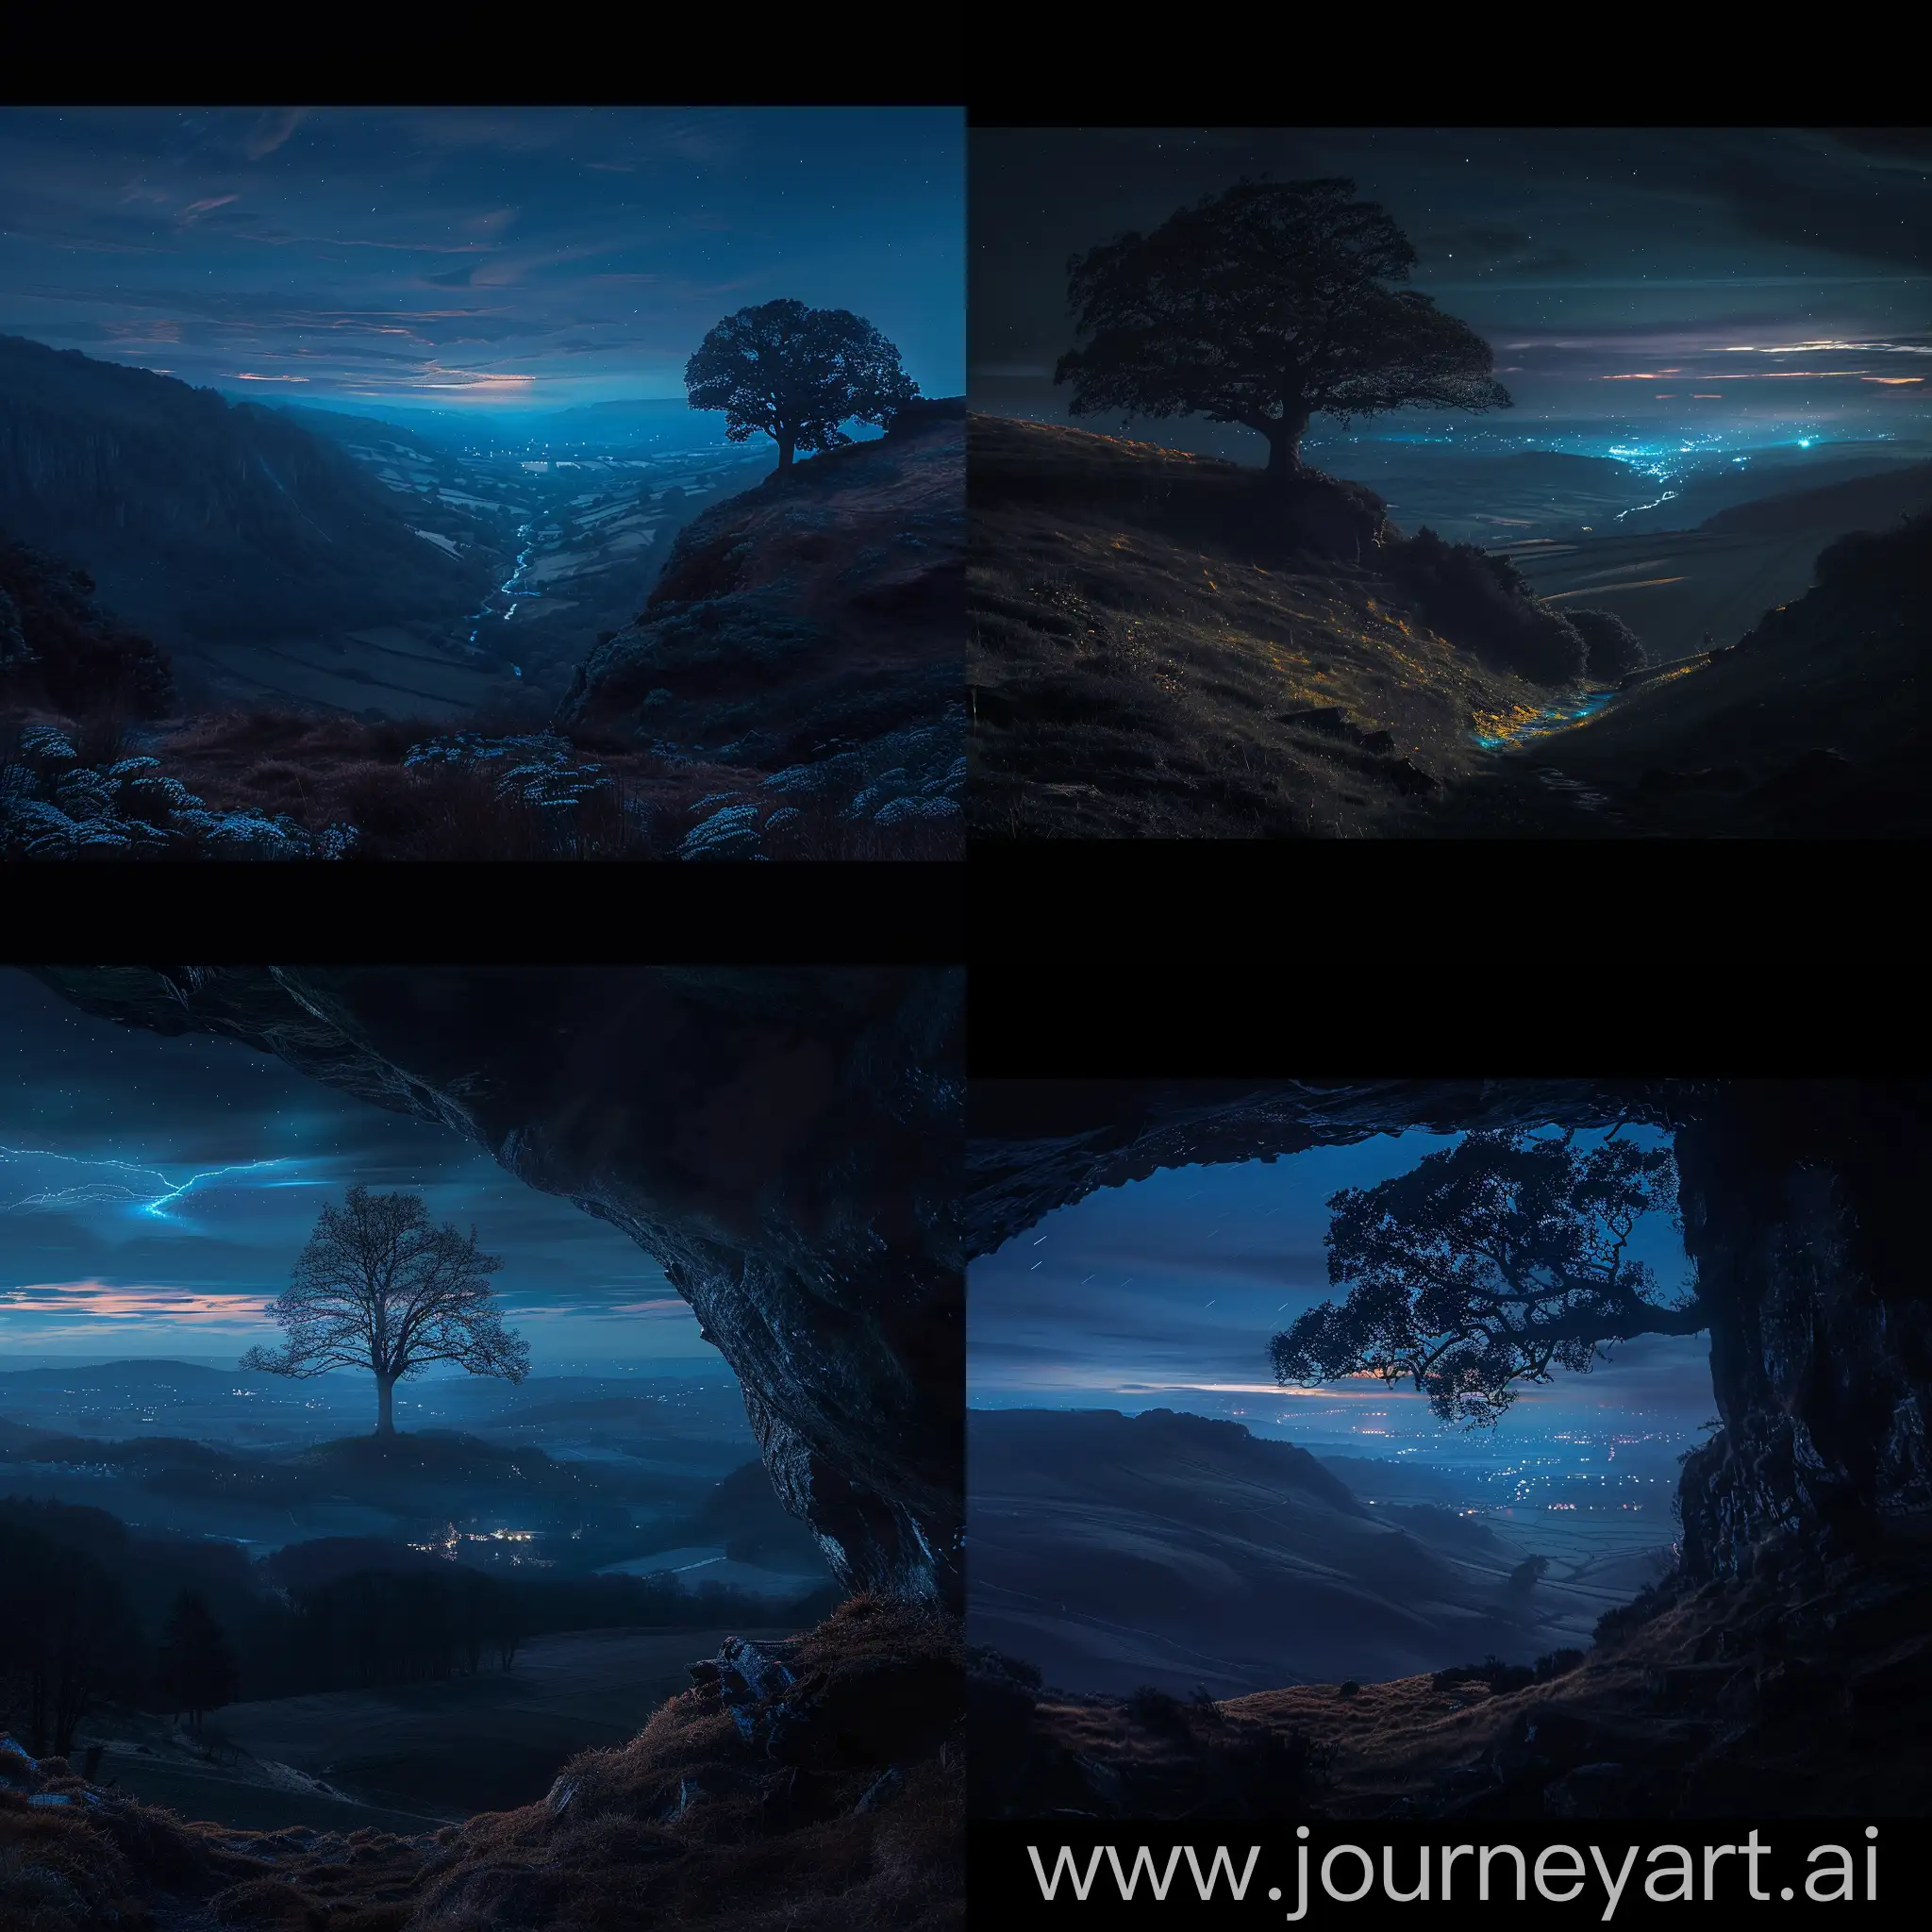 Mysterious-Valley-Night-Landscape-with-Majestic-Tree